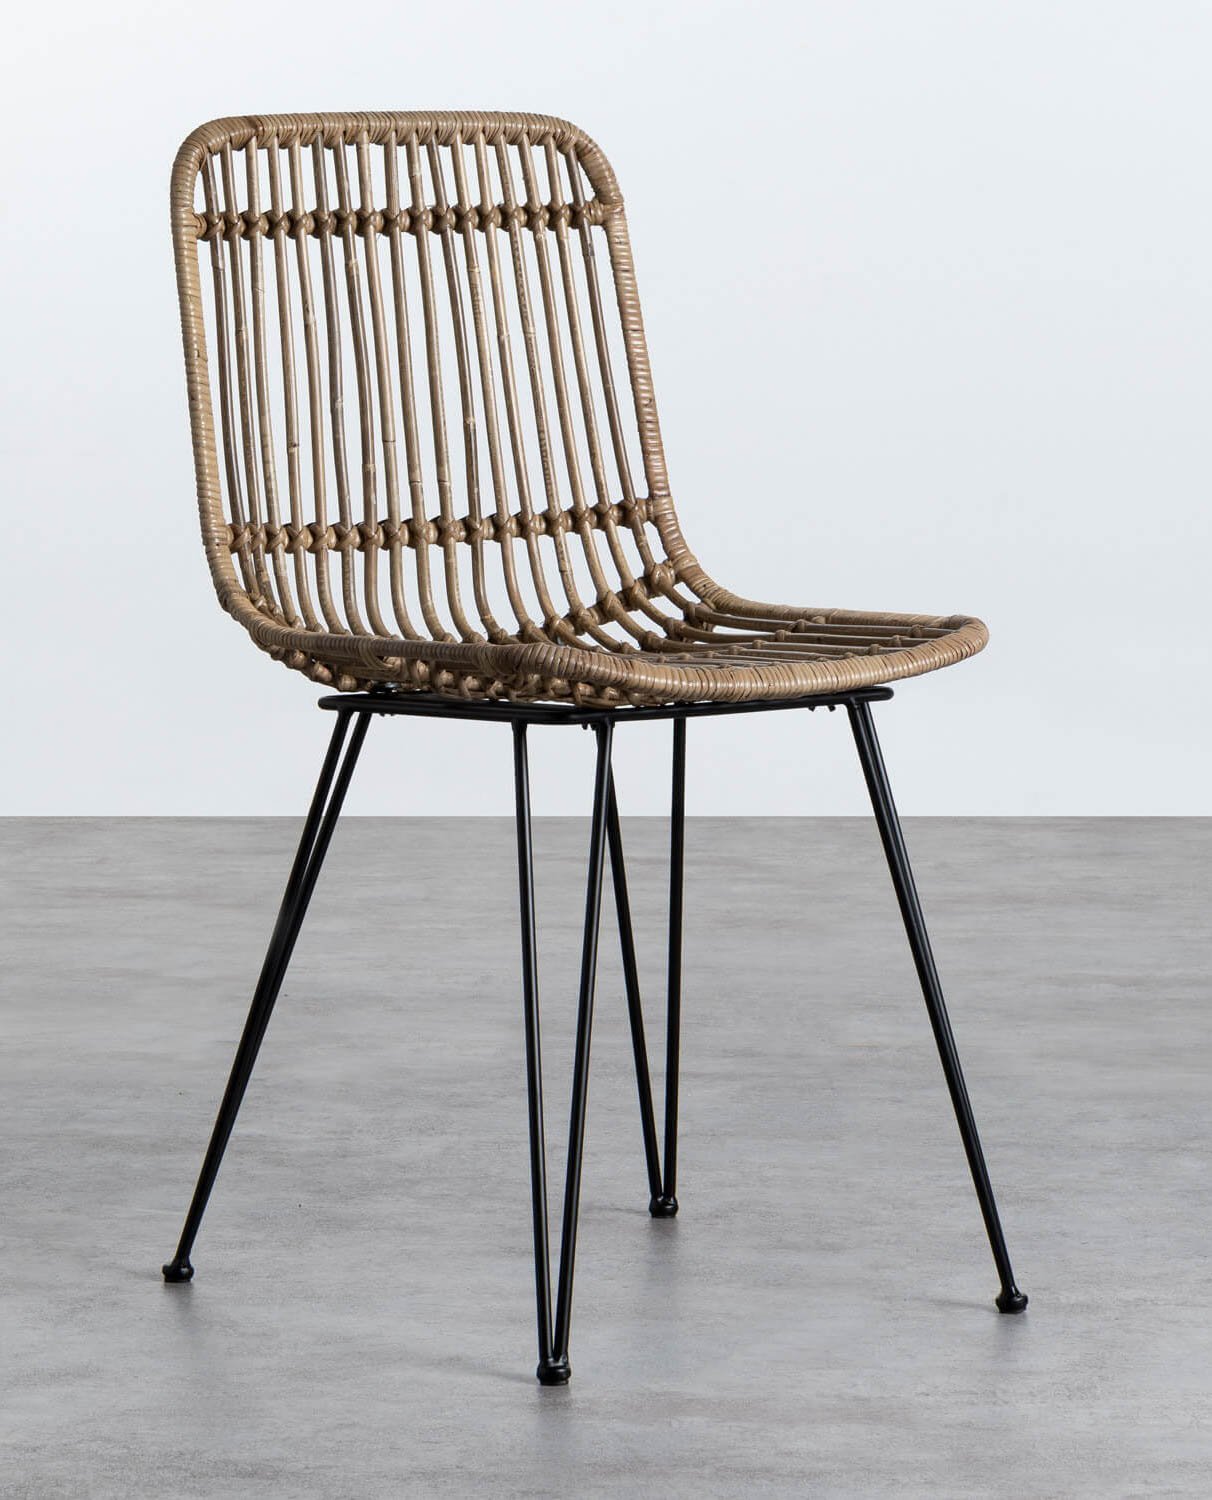 Natural Rattan Outdoor Chair Nice, gallery image 1